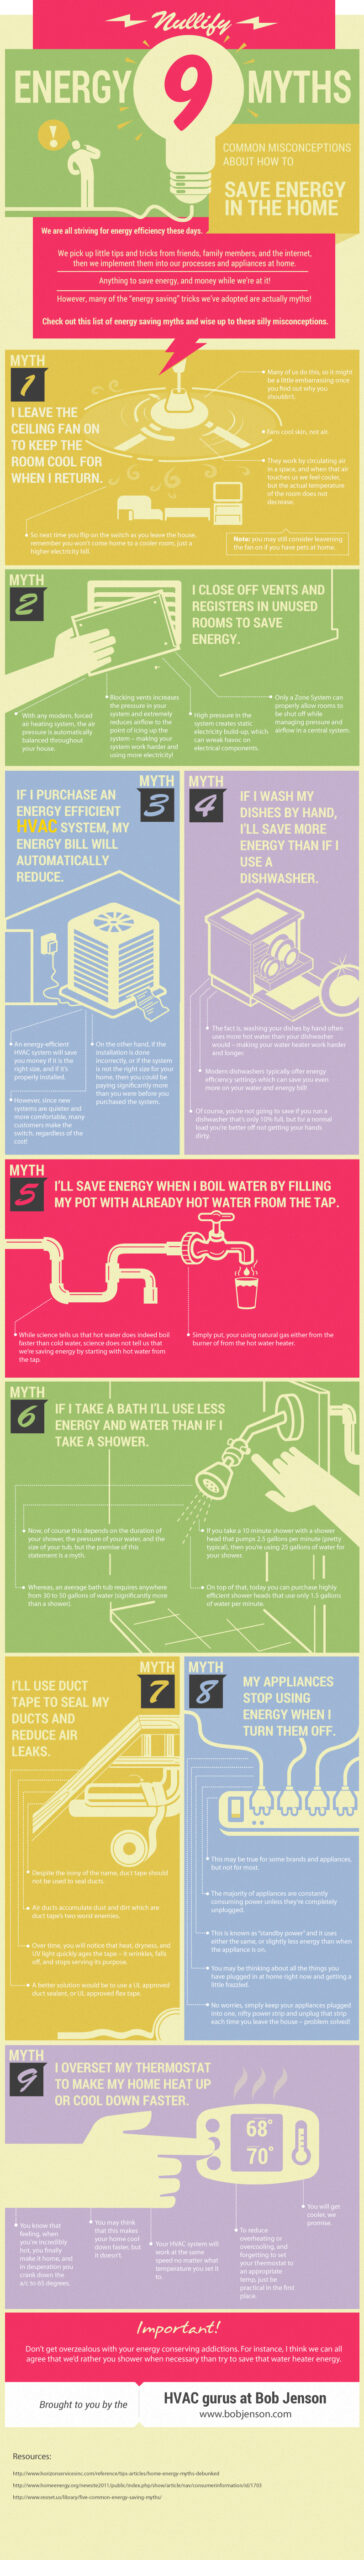 Infographic showing 9 energy myths that people may mistakenly believe